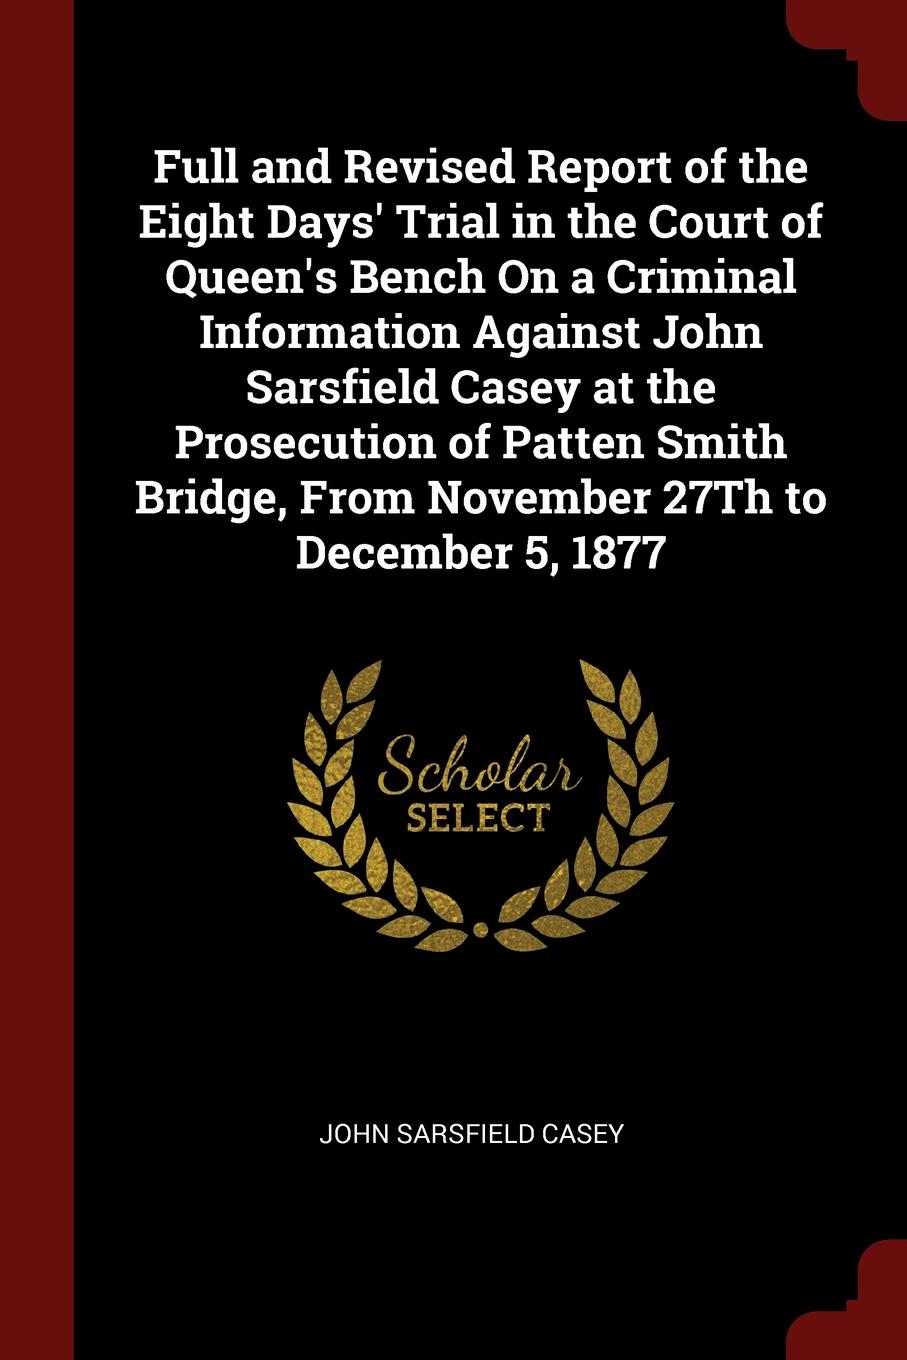 Full and Revised Report of the Eight Days. Trial in the Court of Queen.s Bench On a Criminal Information Against John Sarsfield Casey at the Prosecution of Patten Smith Bridge, From November 27Th to December 5, 1877